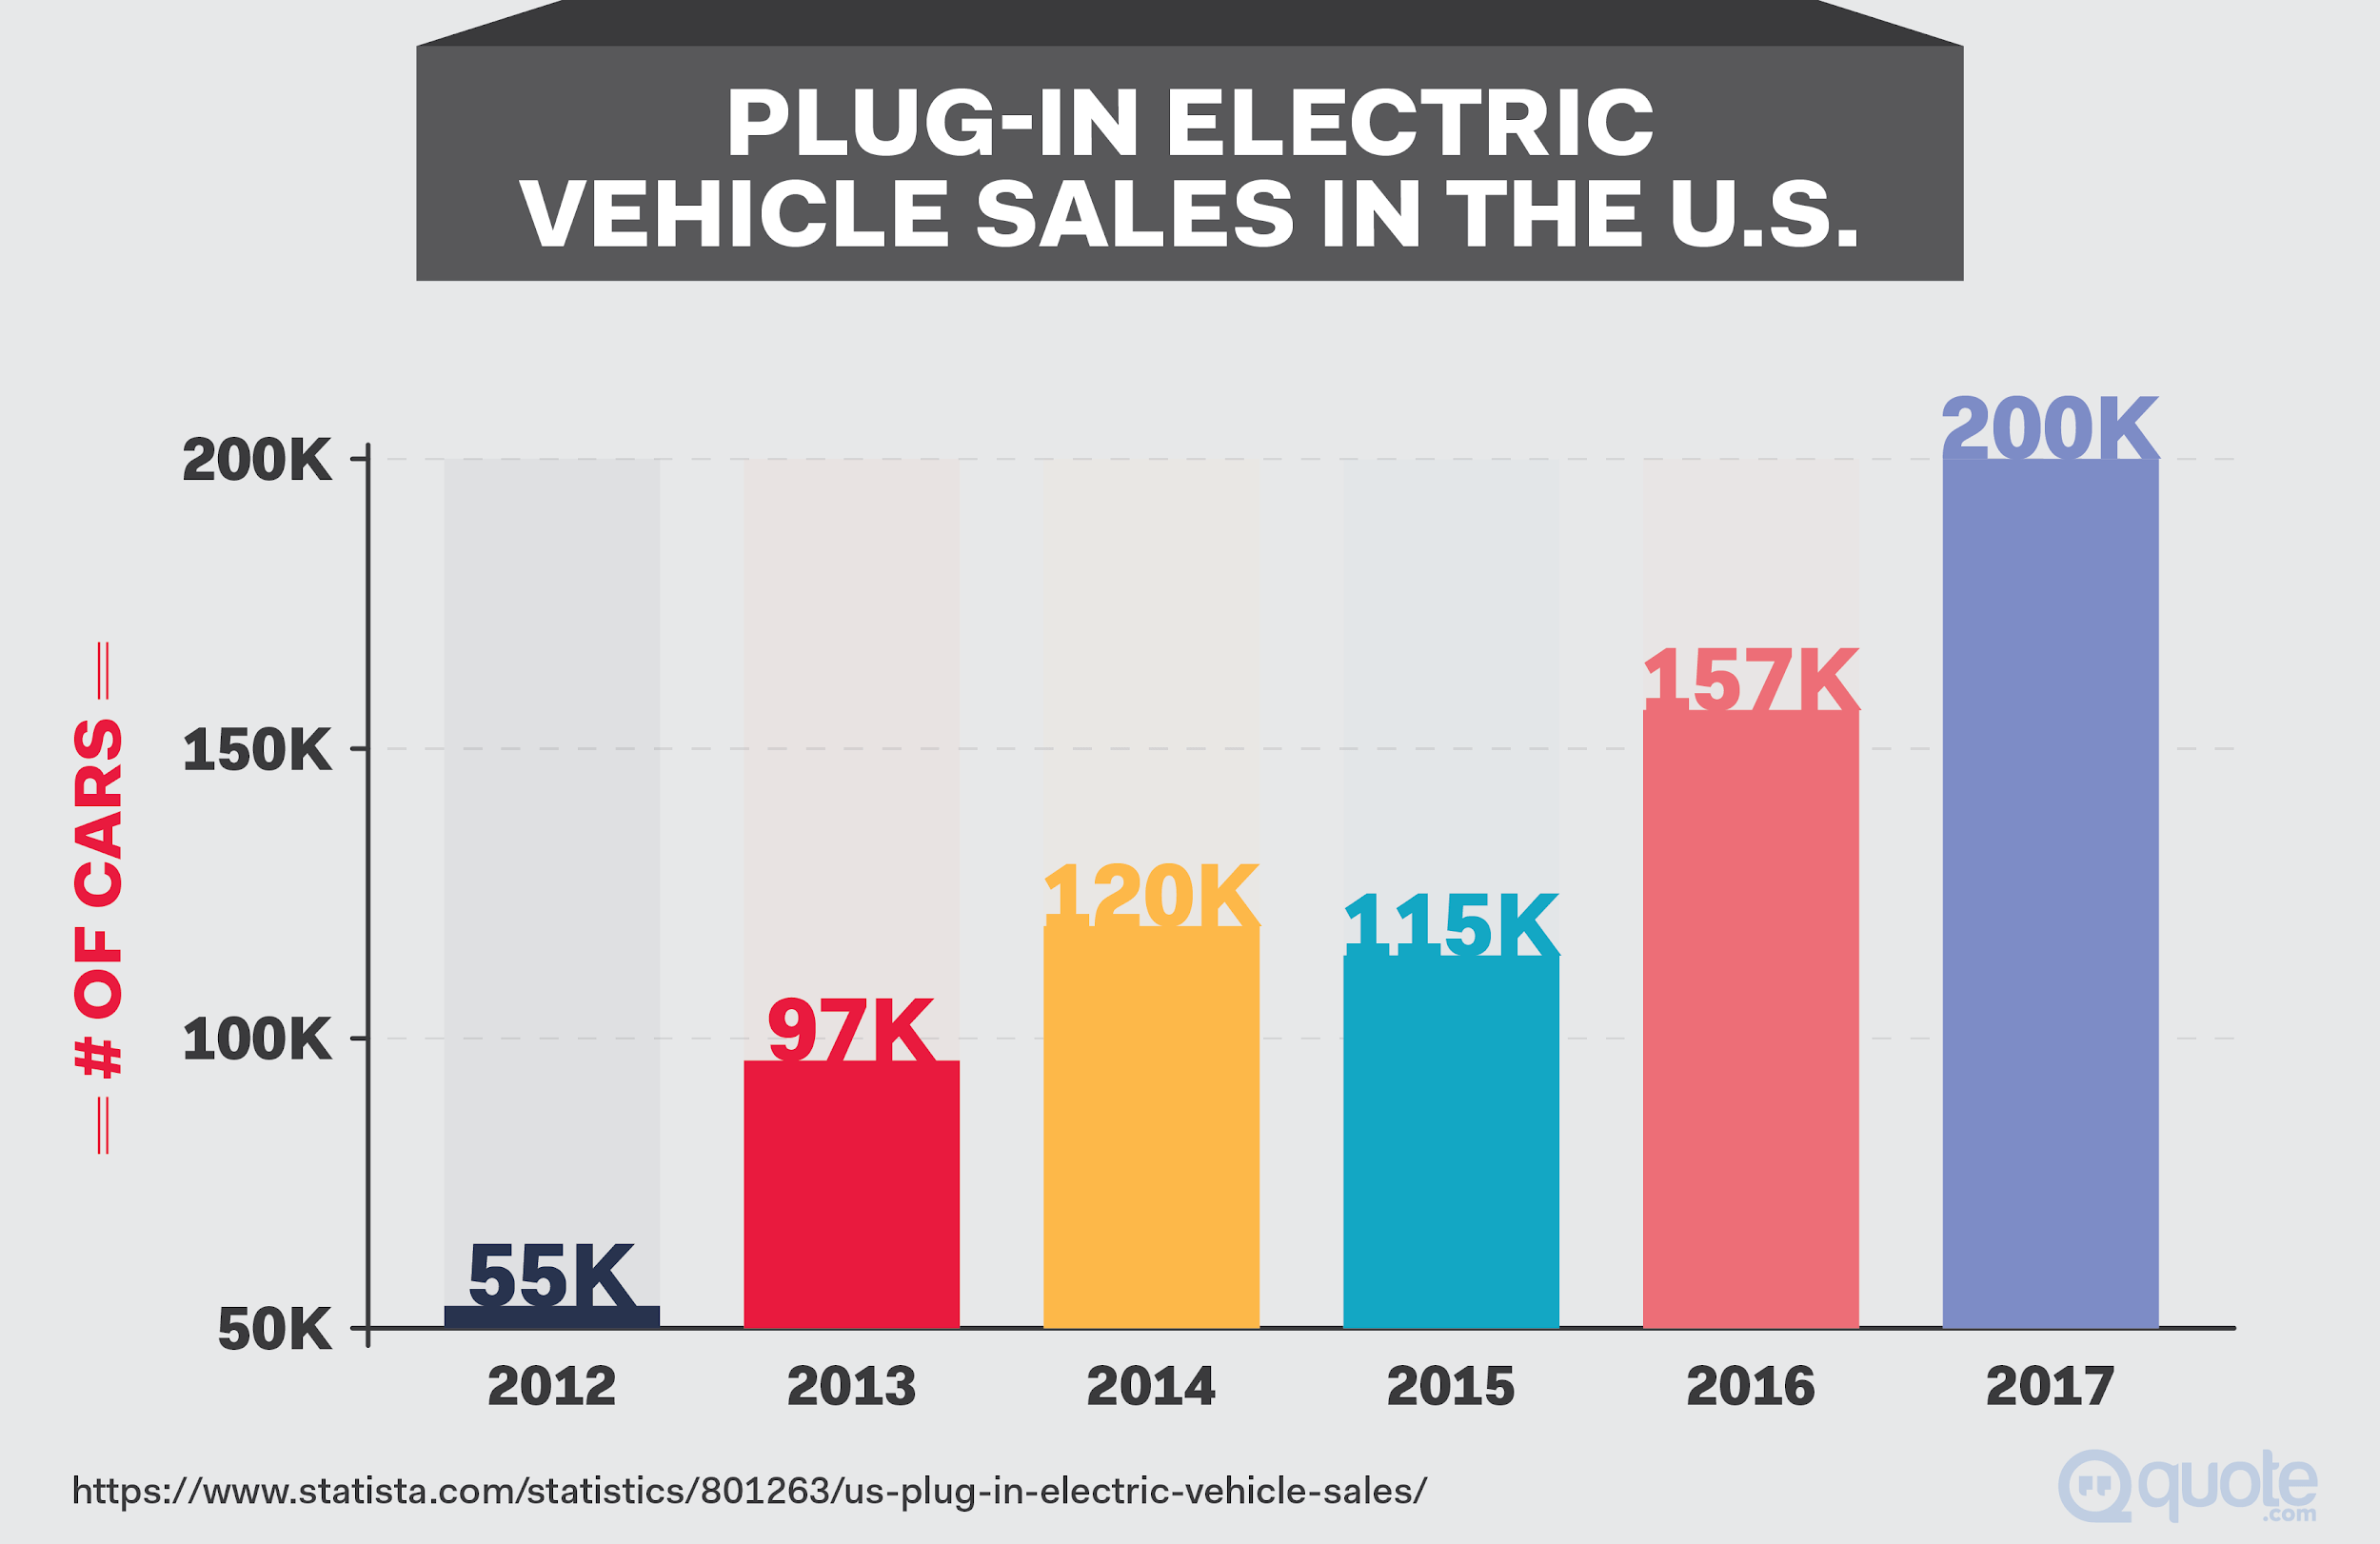 Electric Vehicle Sales in the U.S. 2012-2017